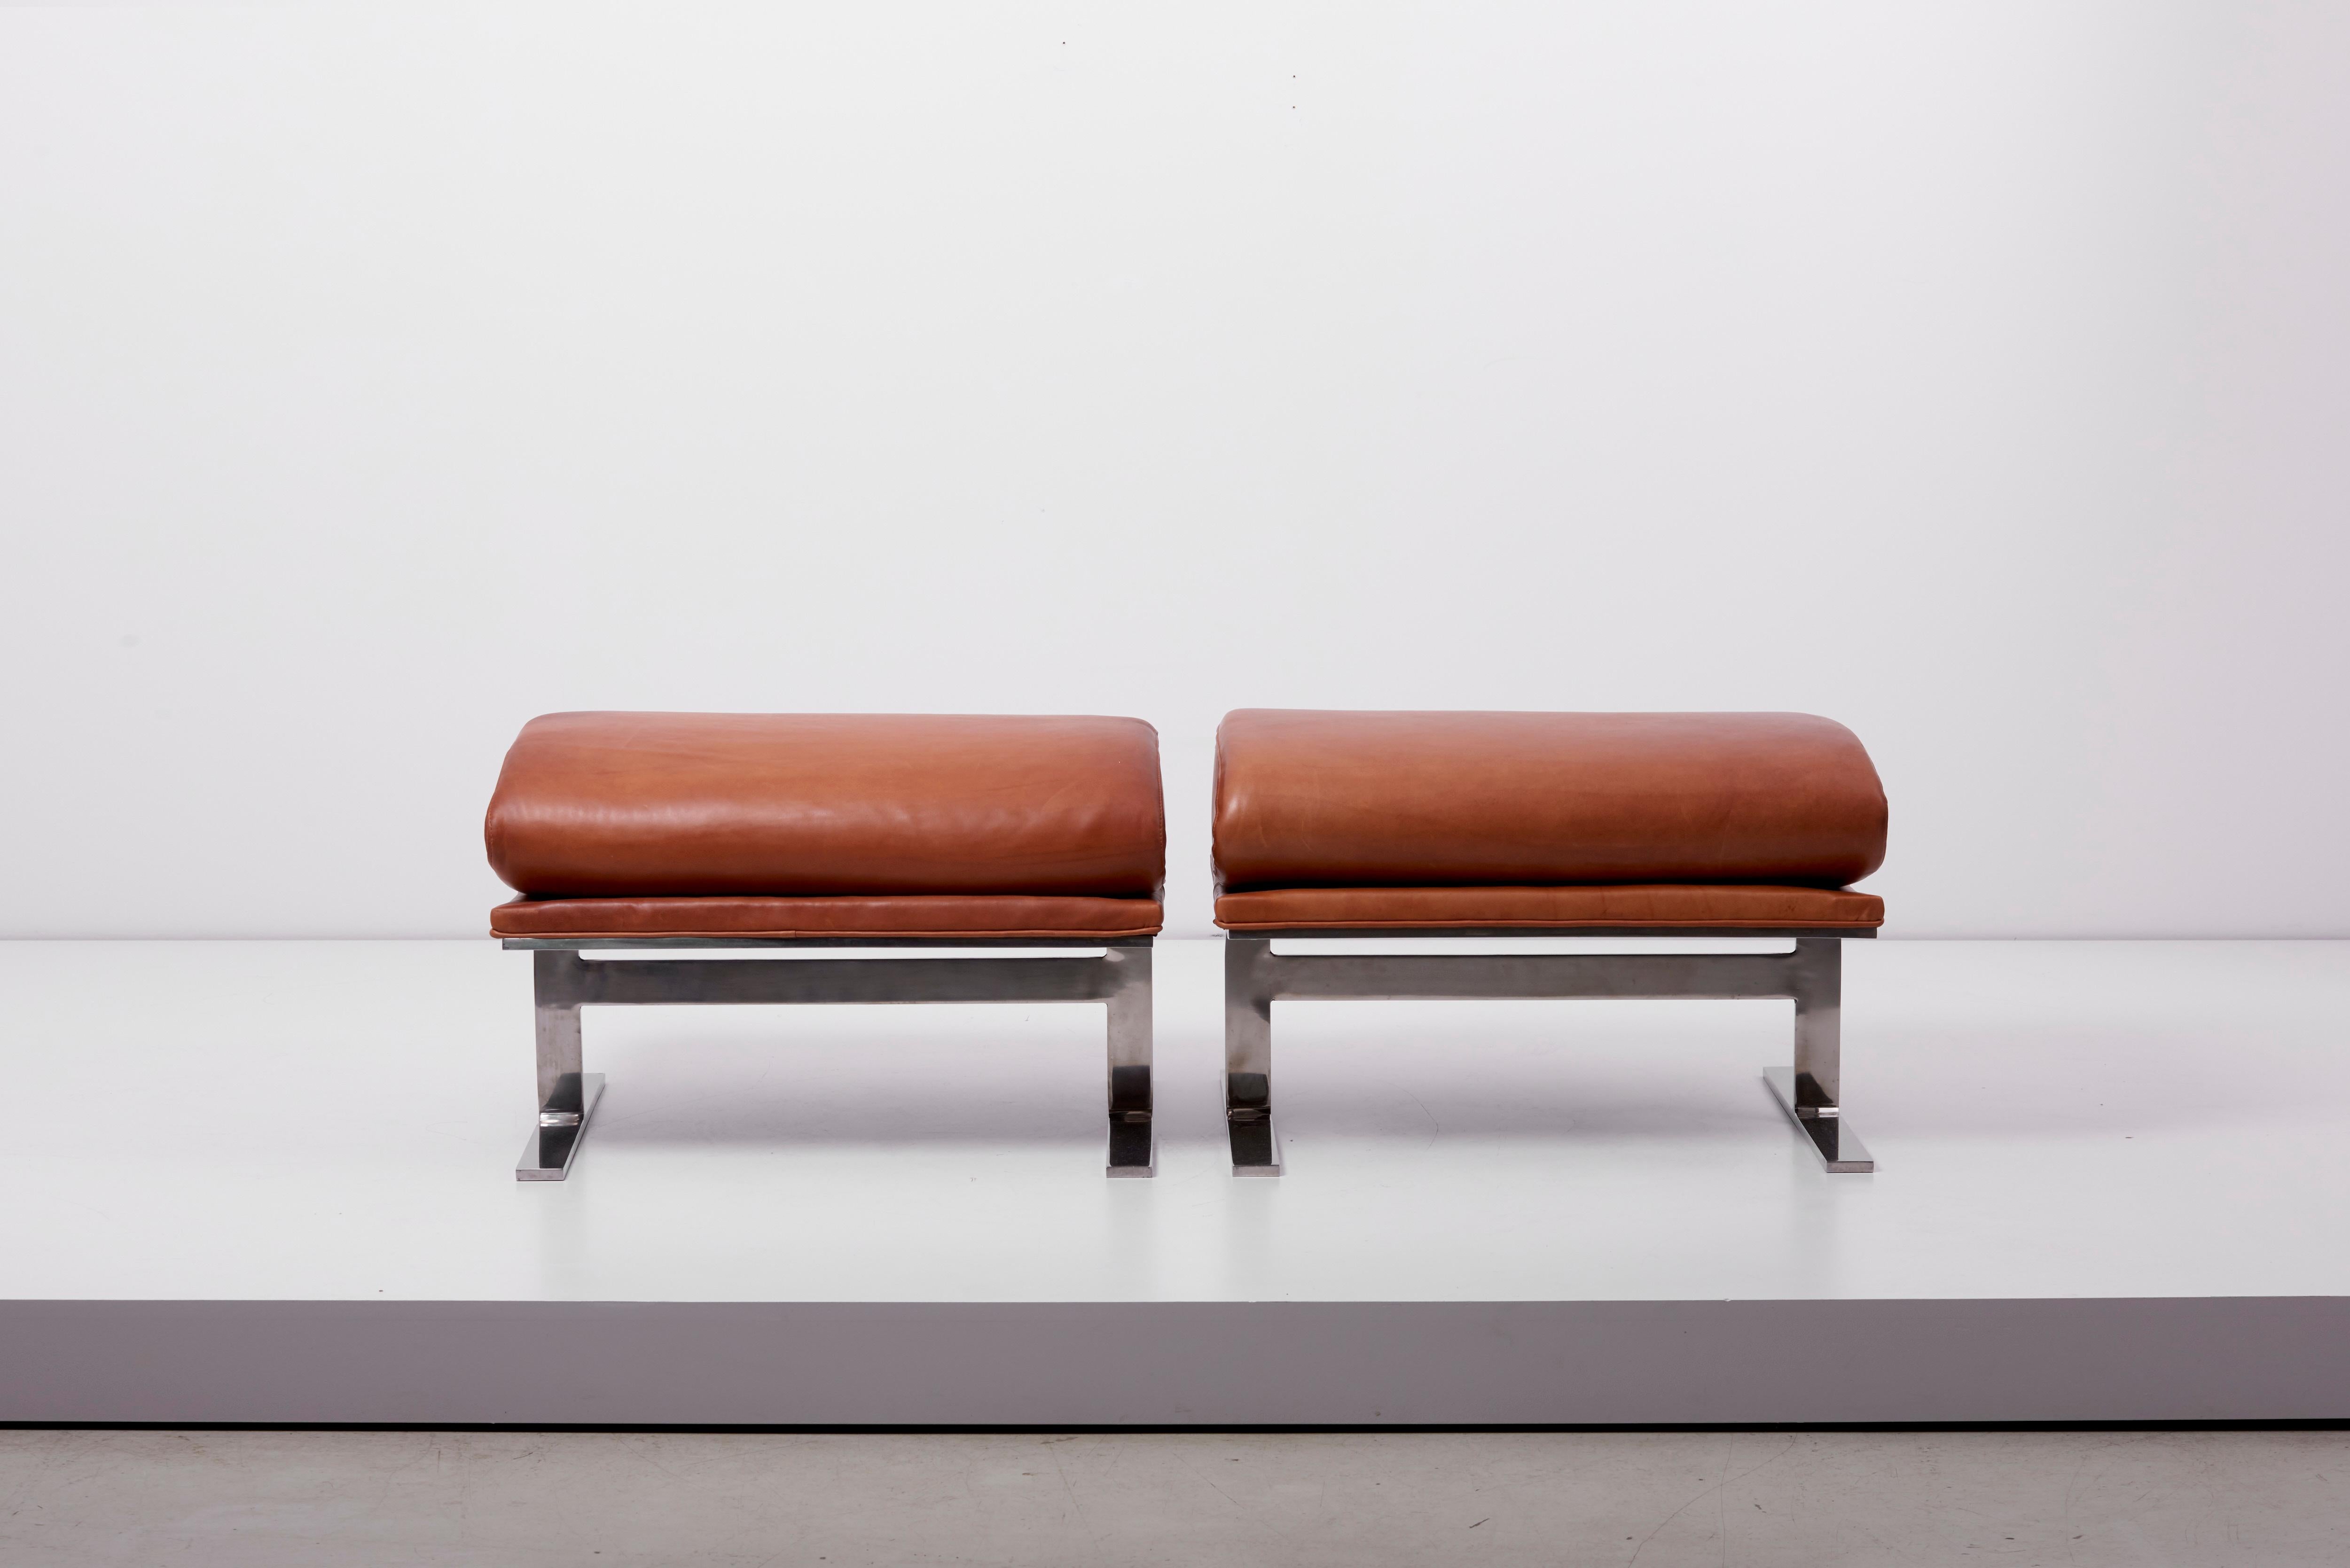 American Pair of Arc Stools 'can also be used as a Bench' by Kipp Stewart for Directional